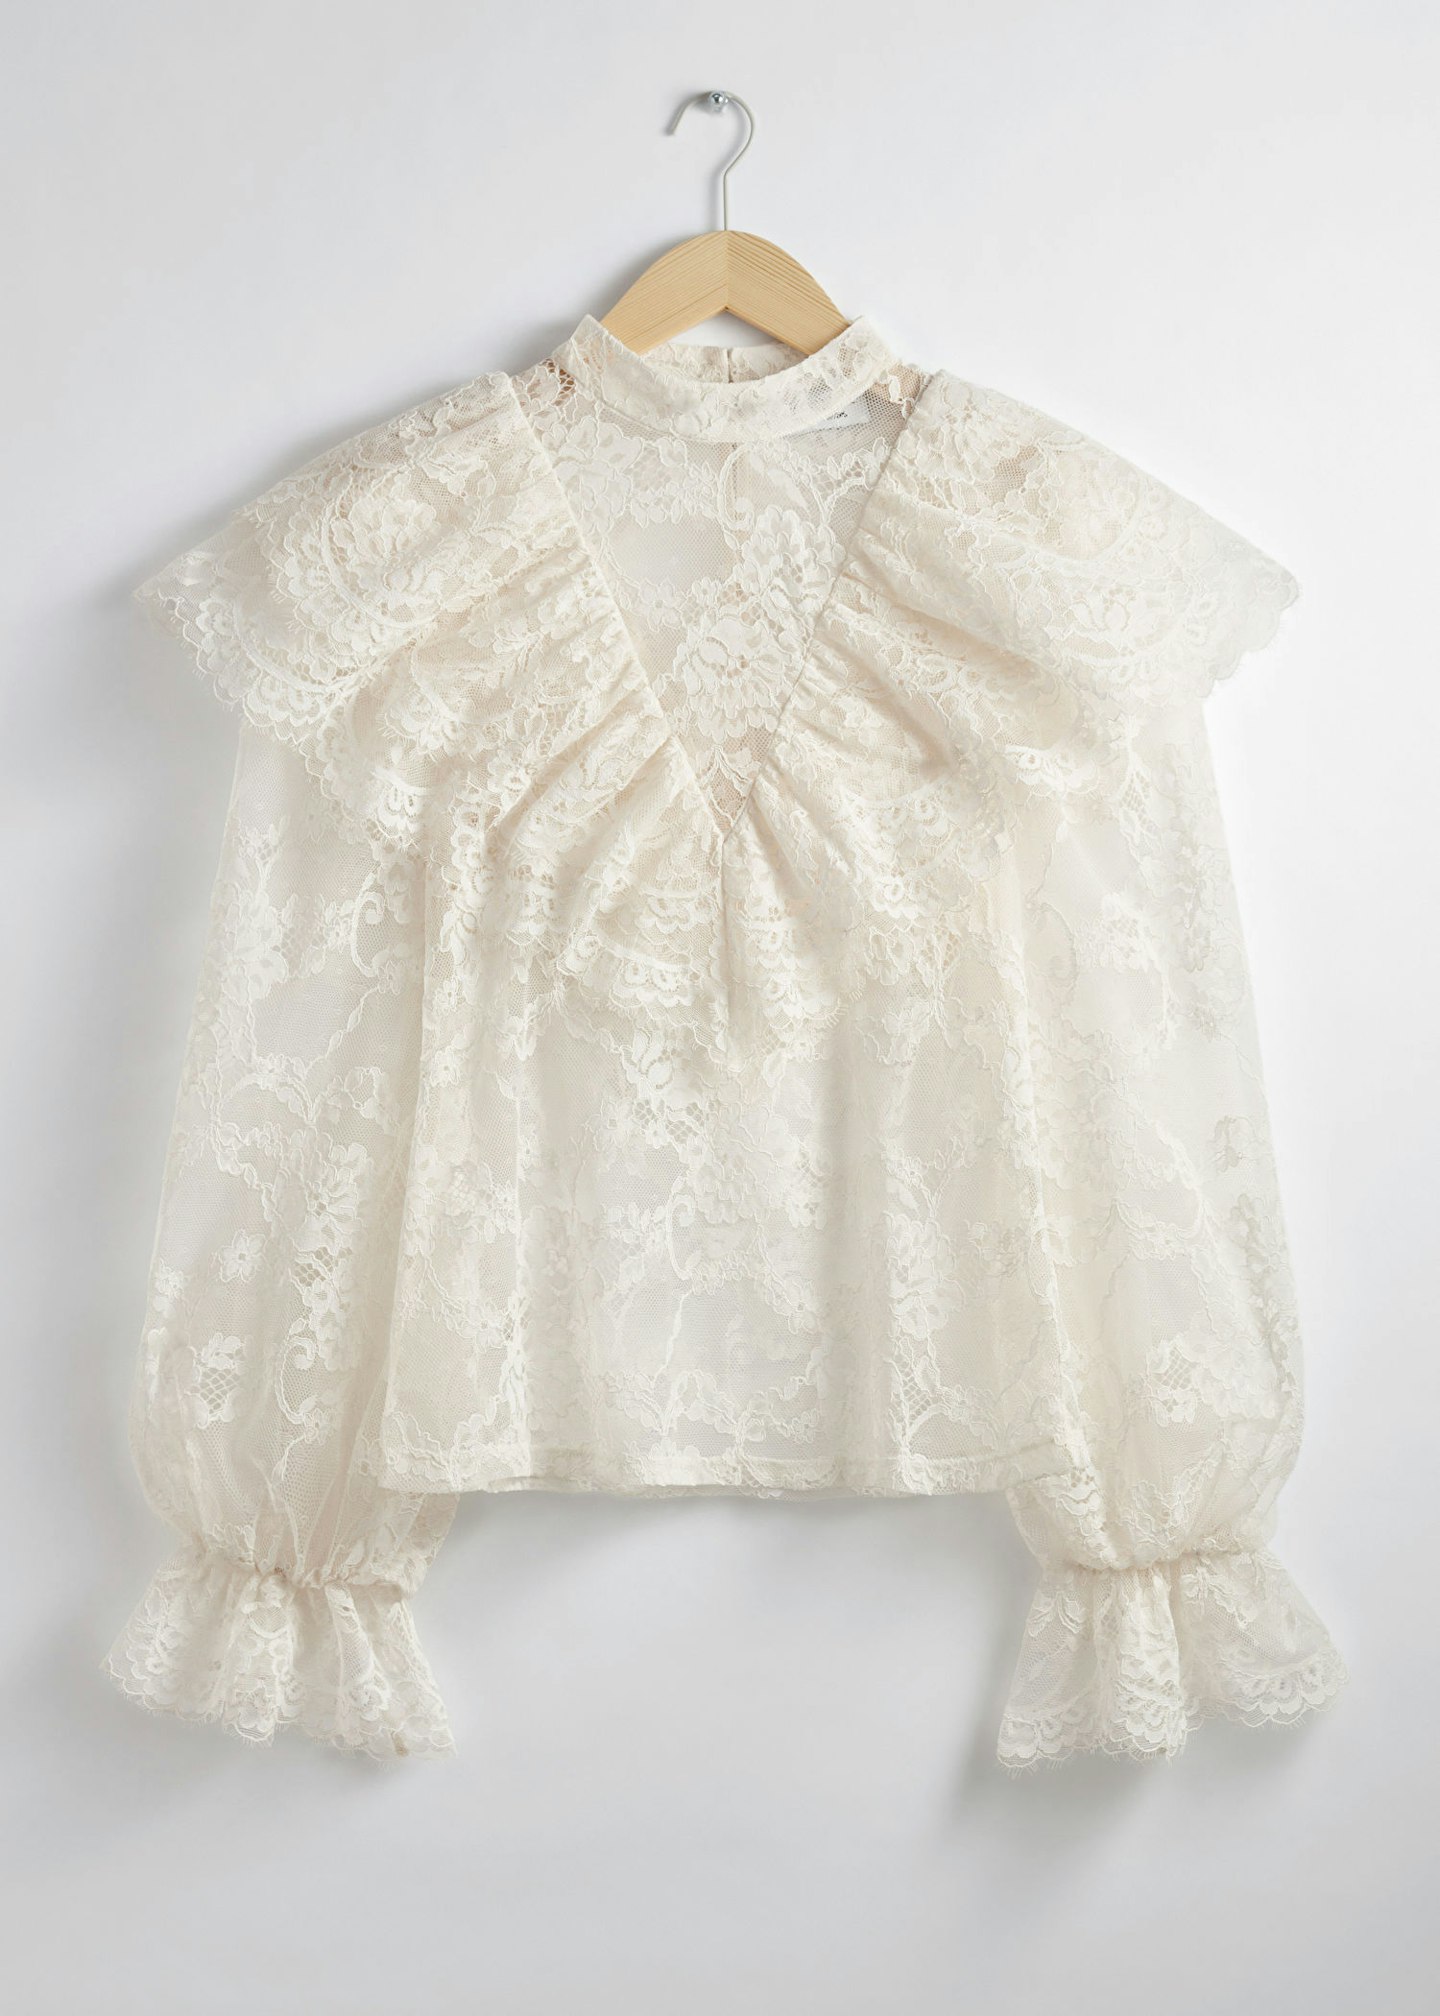 & Other Stories ruffle blouse 